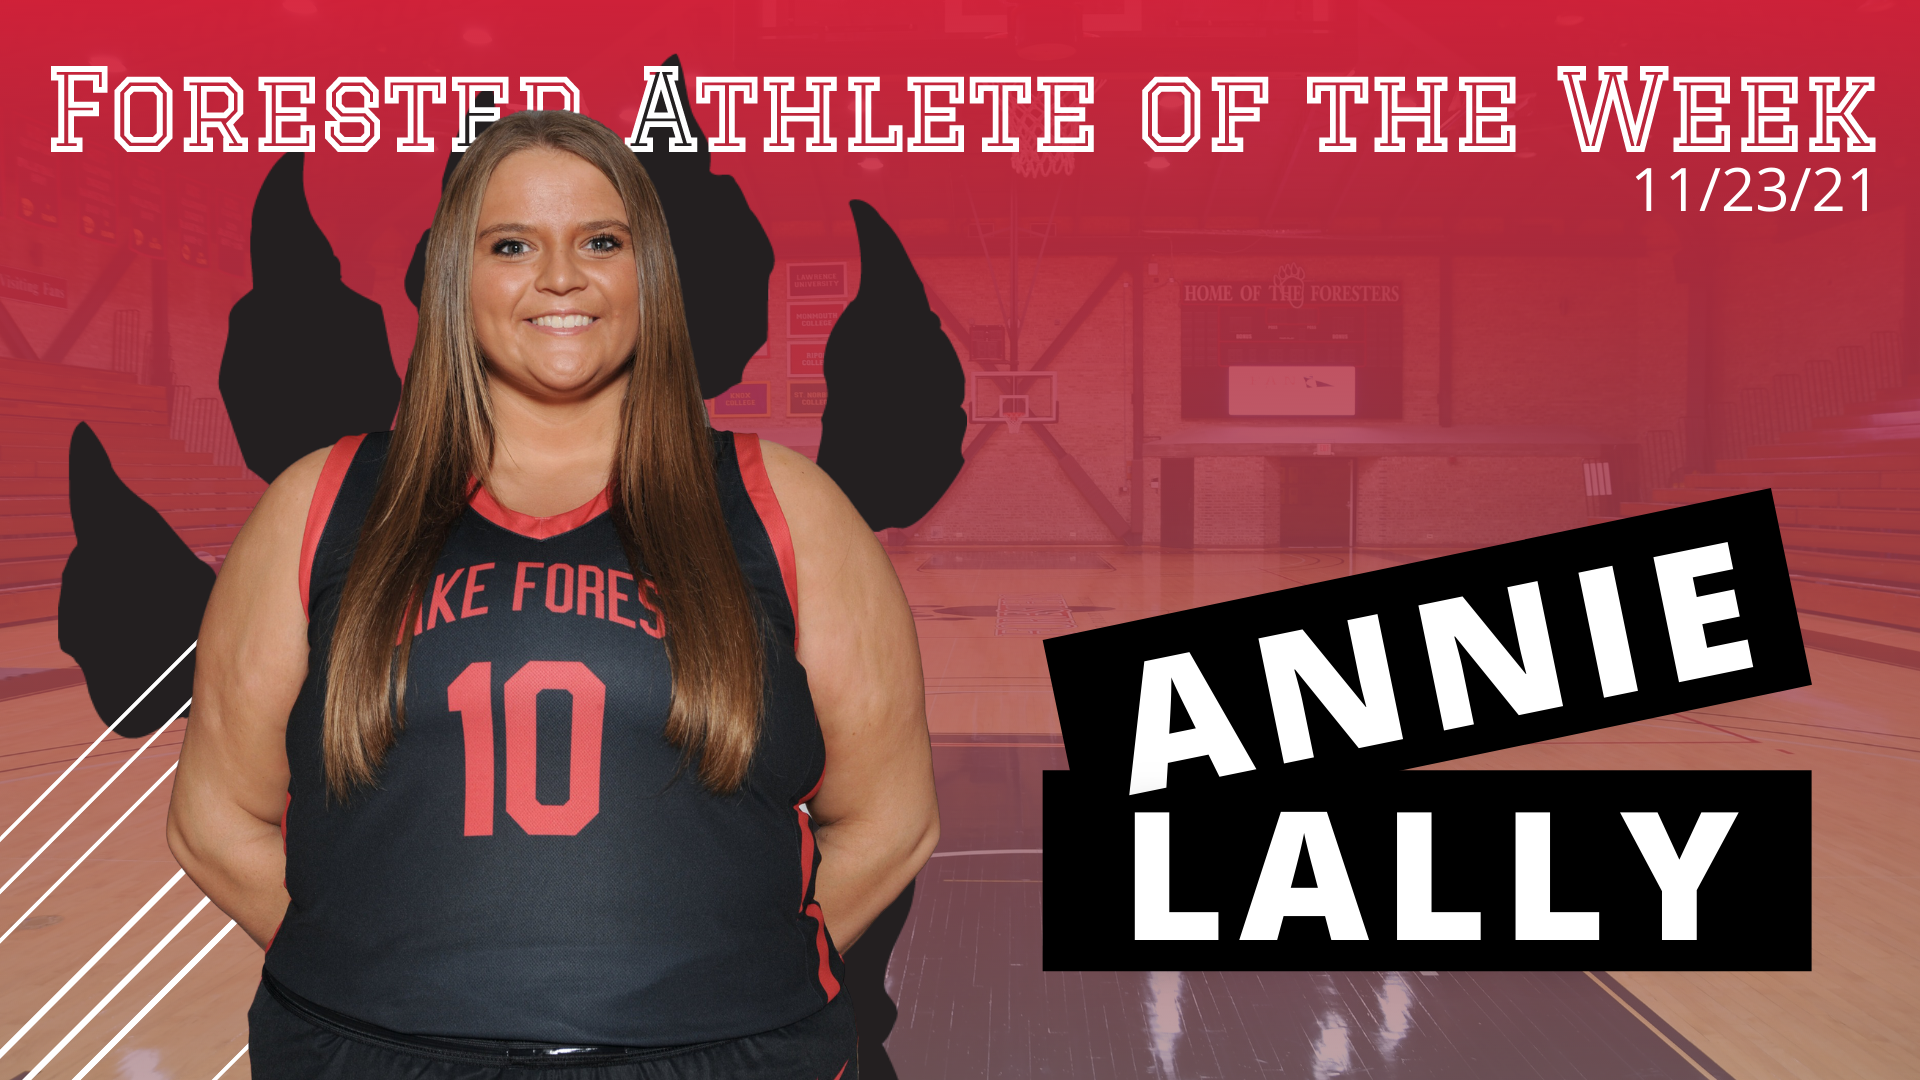 Women's Forester Athlete of the Week Awarded to Annie Lally